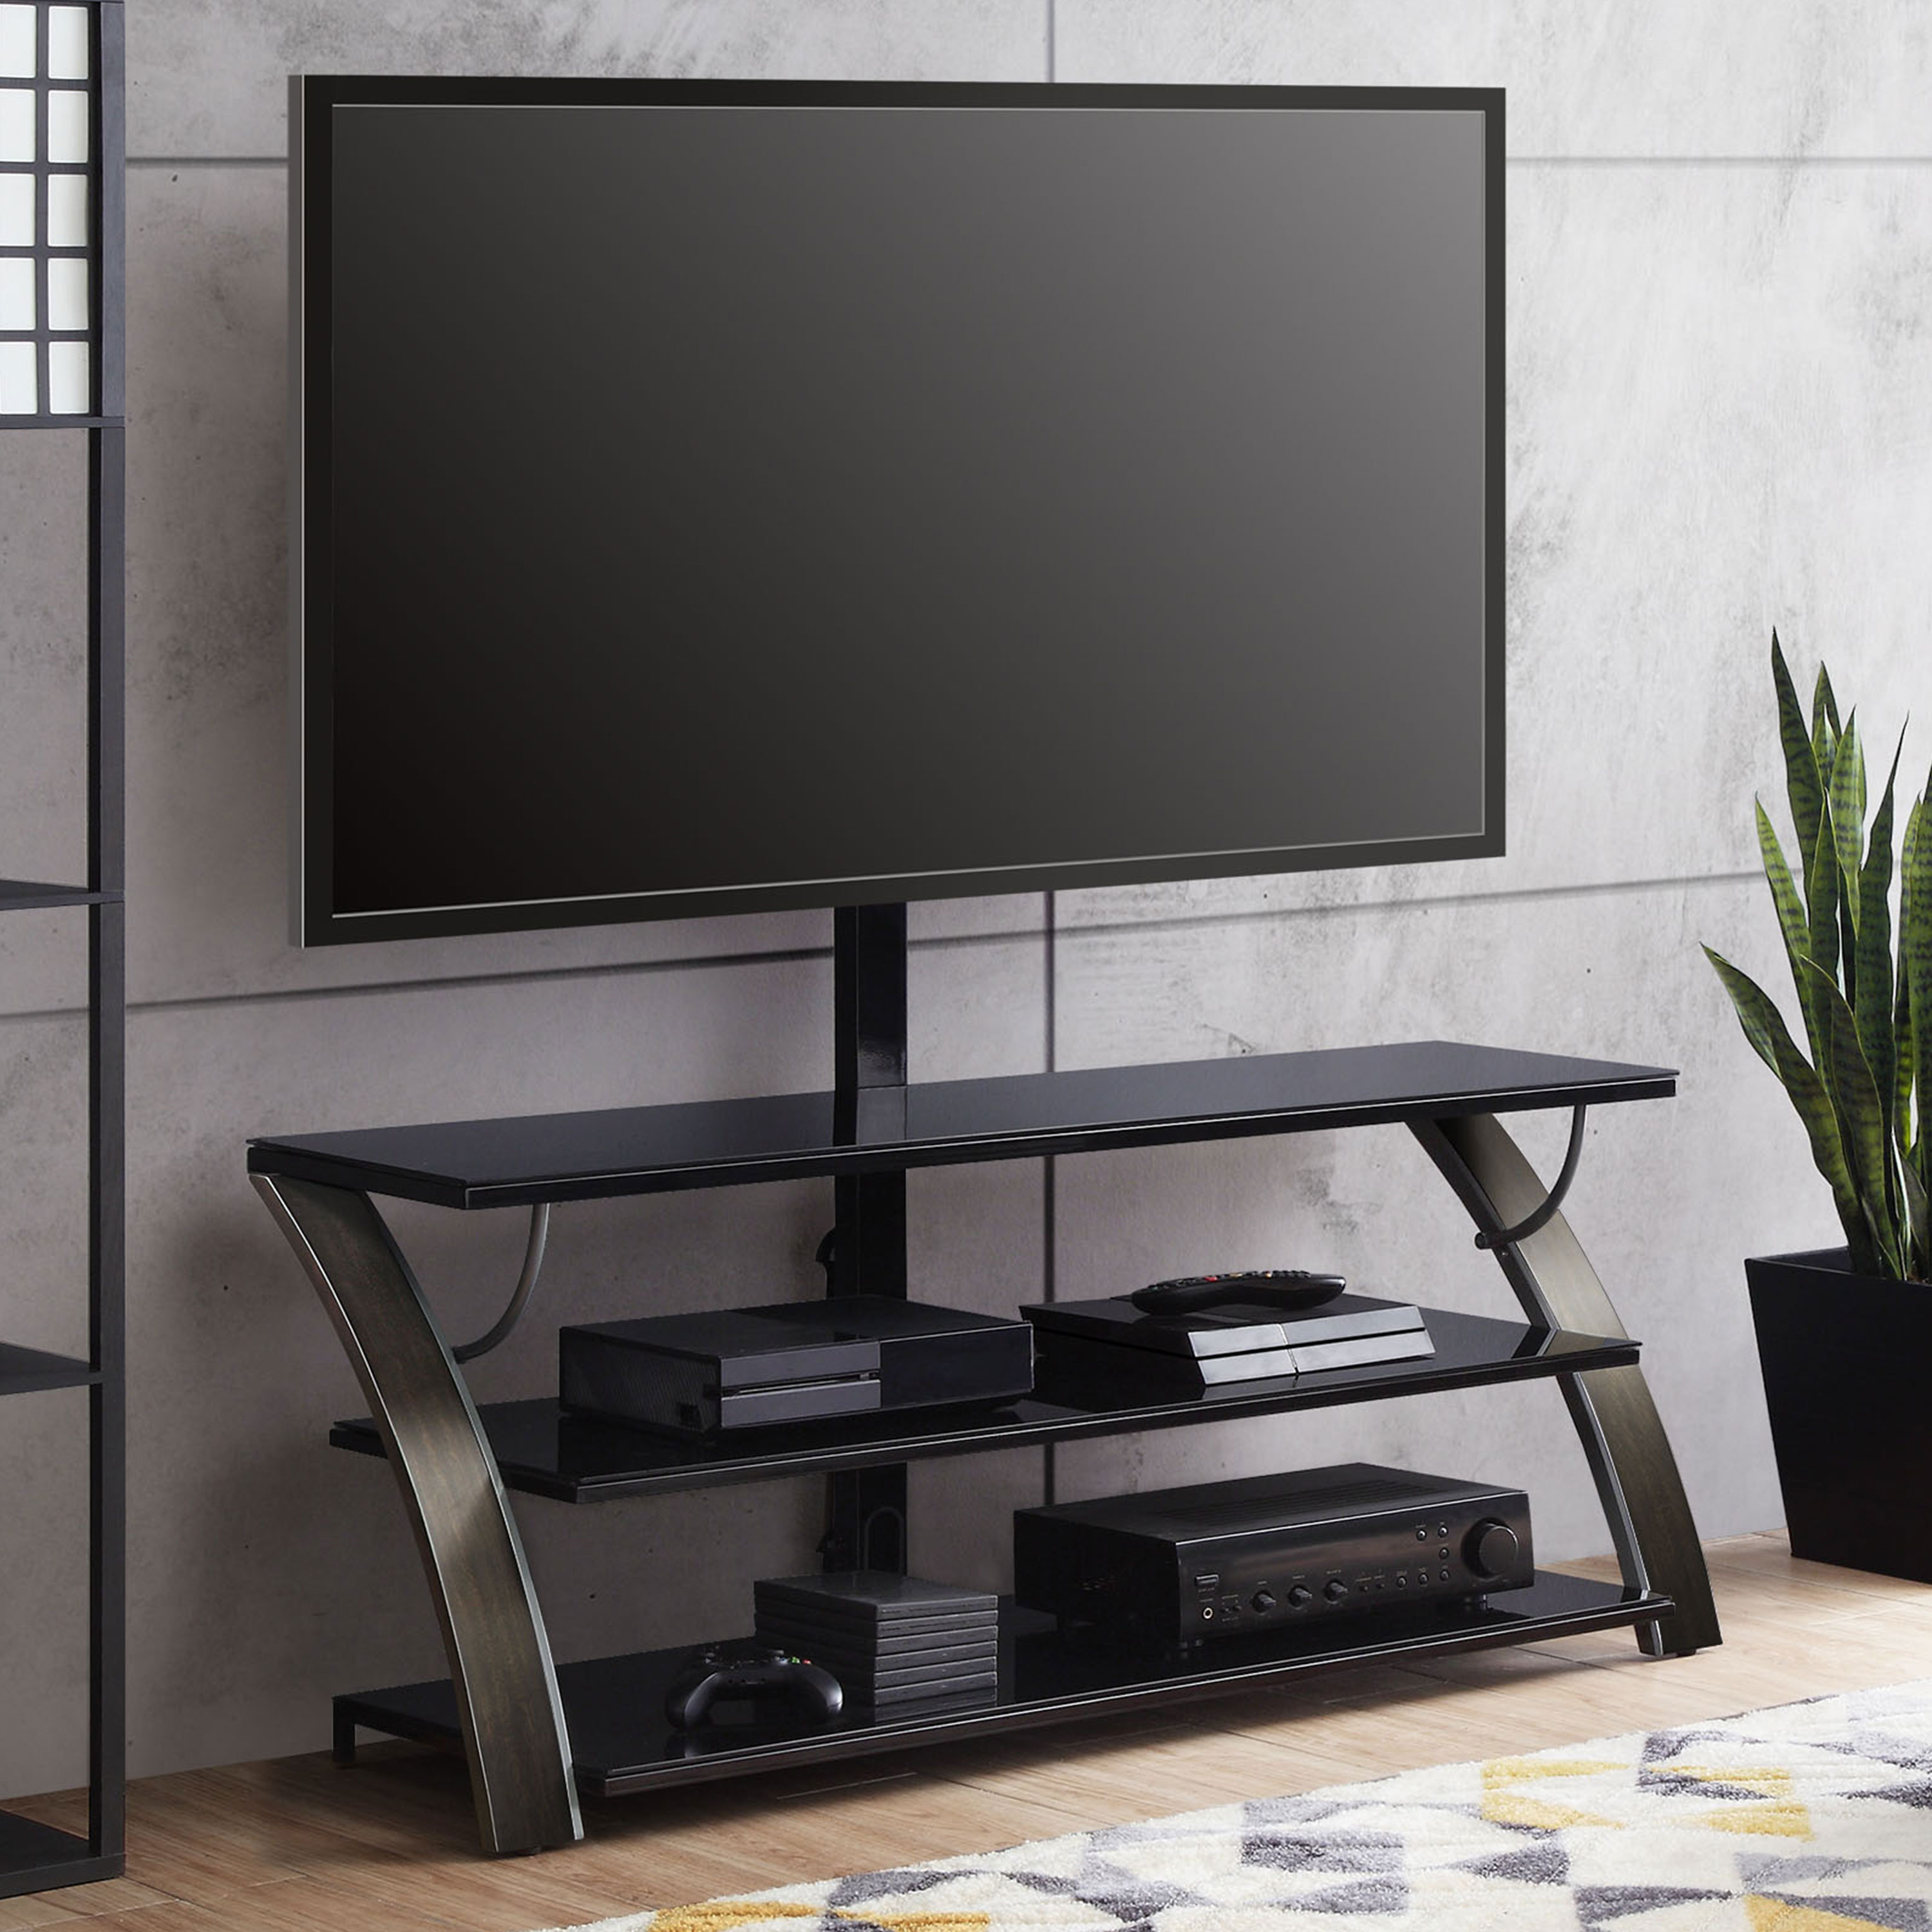 Whalen Payton 3-in-1 Flat Panel TV Stand for TVs up to 65", Charcoal - image 1 of 11